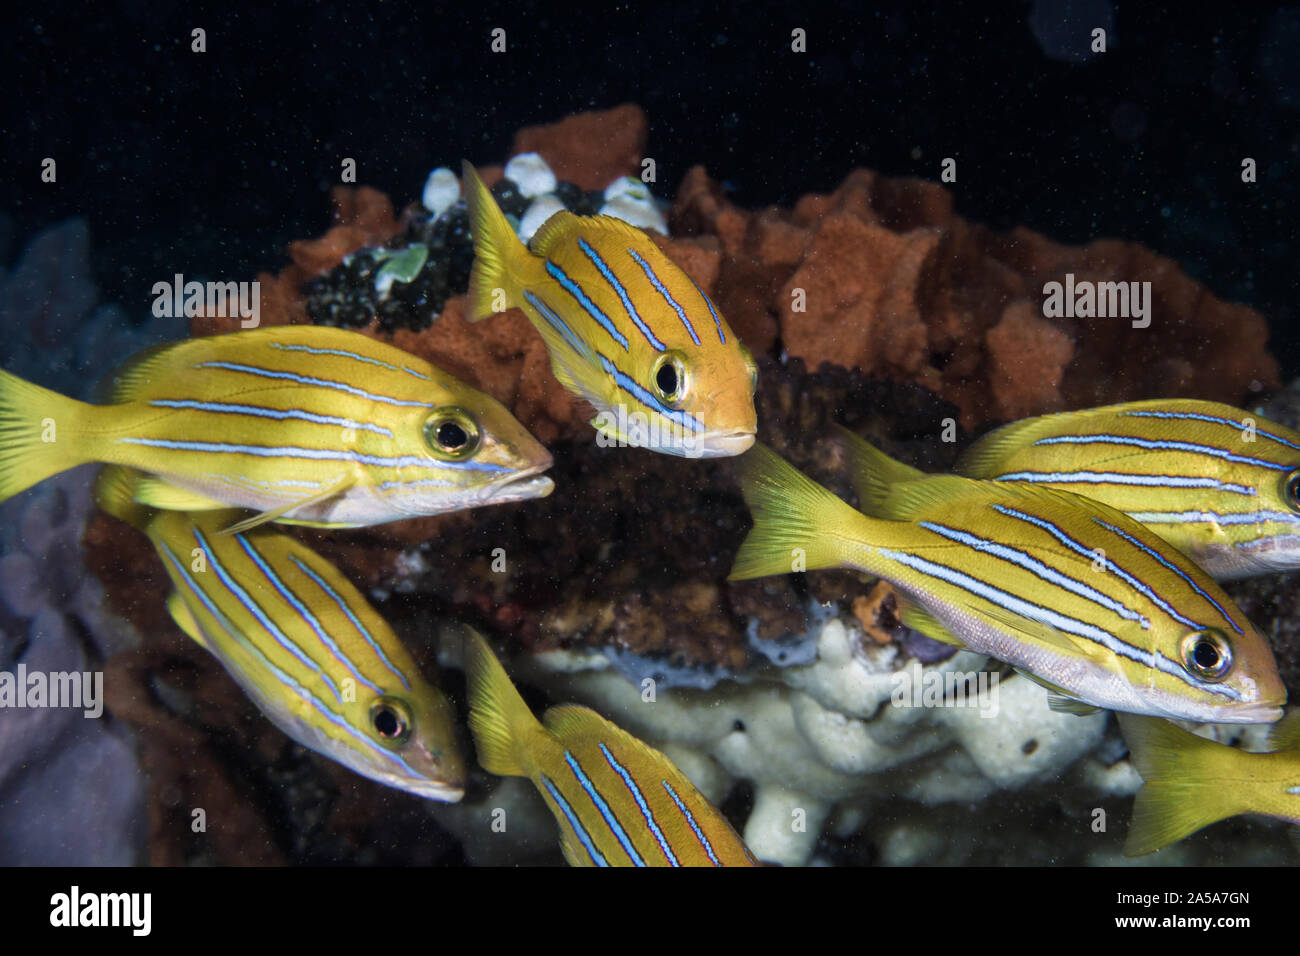 Bengal Snapper fish (Lutjanus bengalensis) bright yellow fish with four blue lines on the side of his body. Stock Photo